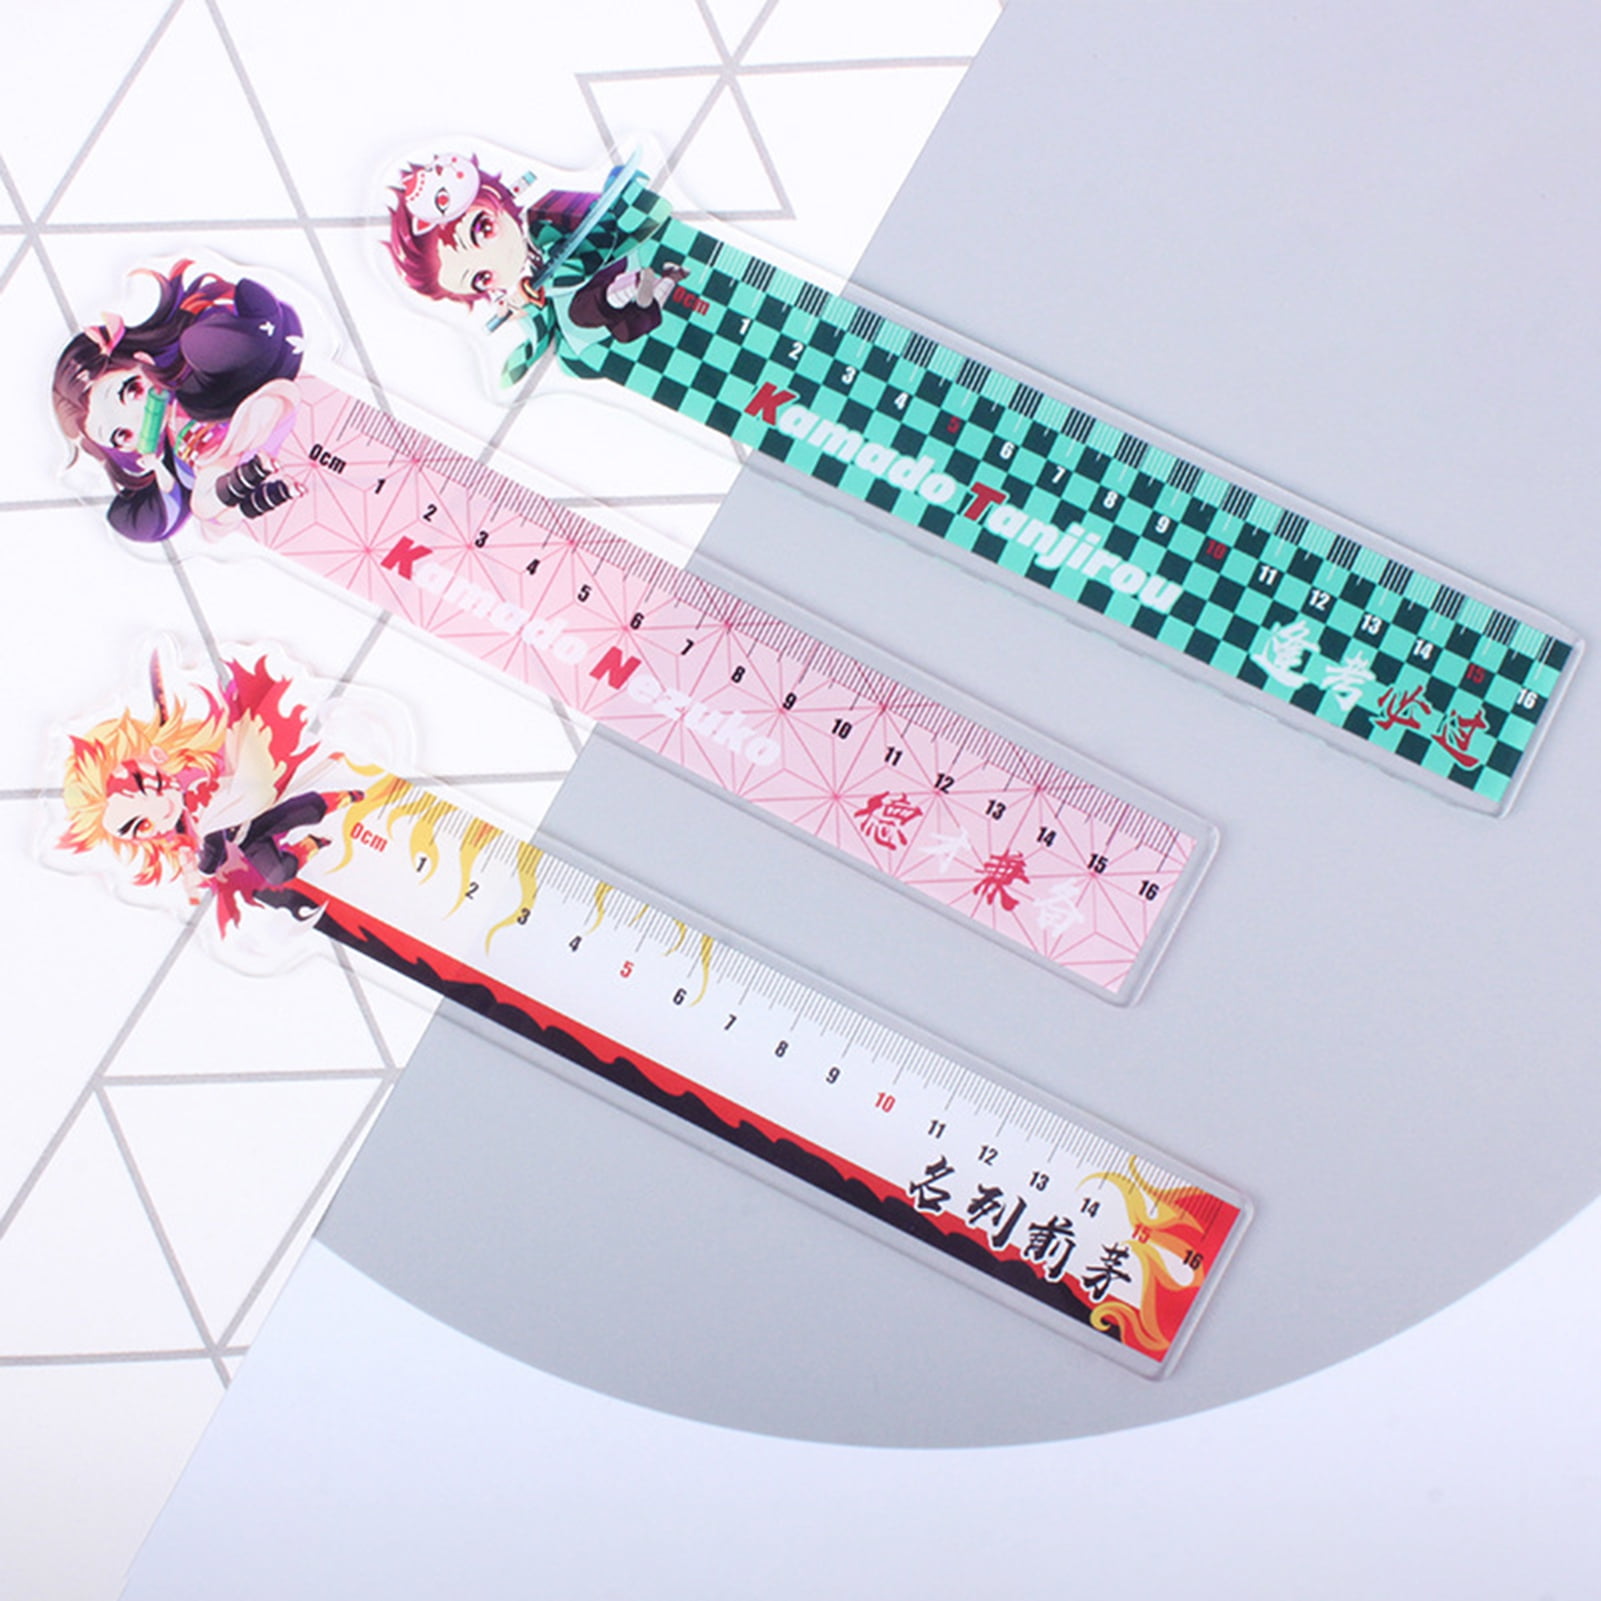 24 Pcs Plastic Rulers,6 Inch Clear Straight Ruler Colored Safety Ruler -  AliExpress